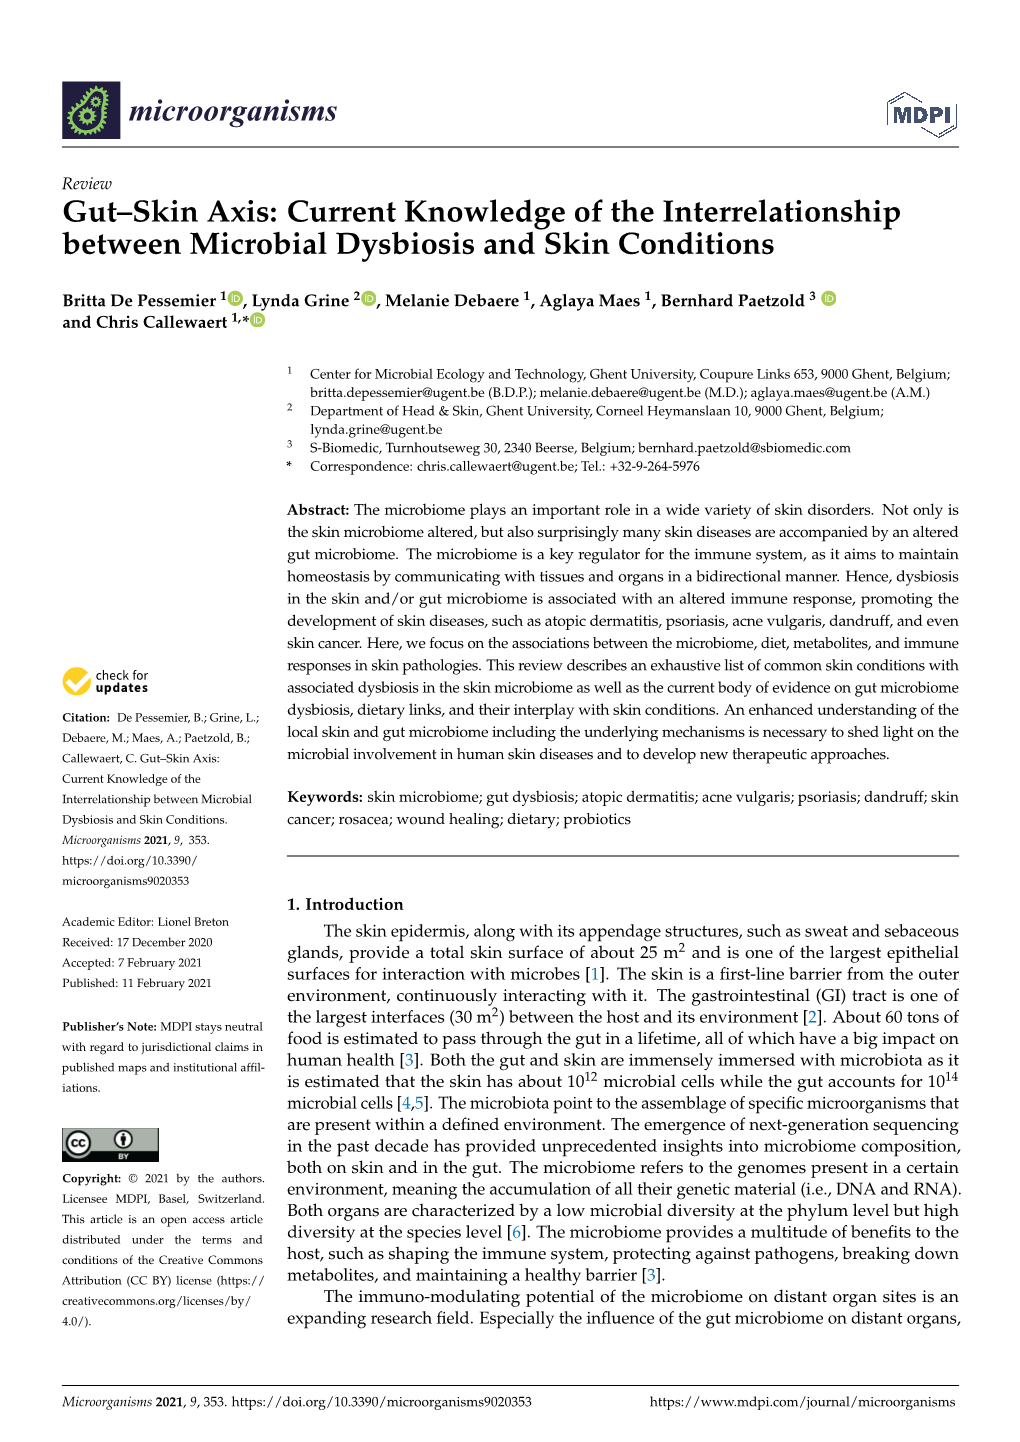 Gut–Skin Axis: Current Knowledge of the Interrelationship Between Microbial Dysbiosis and Skin Conditions